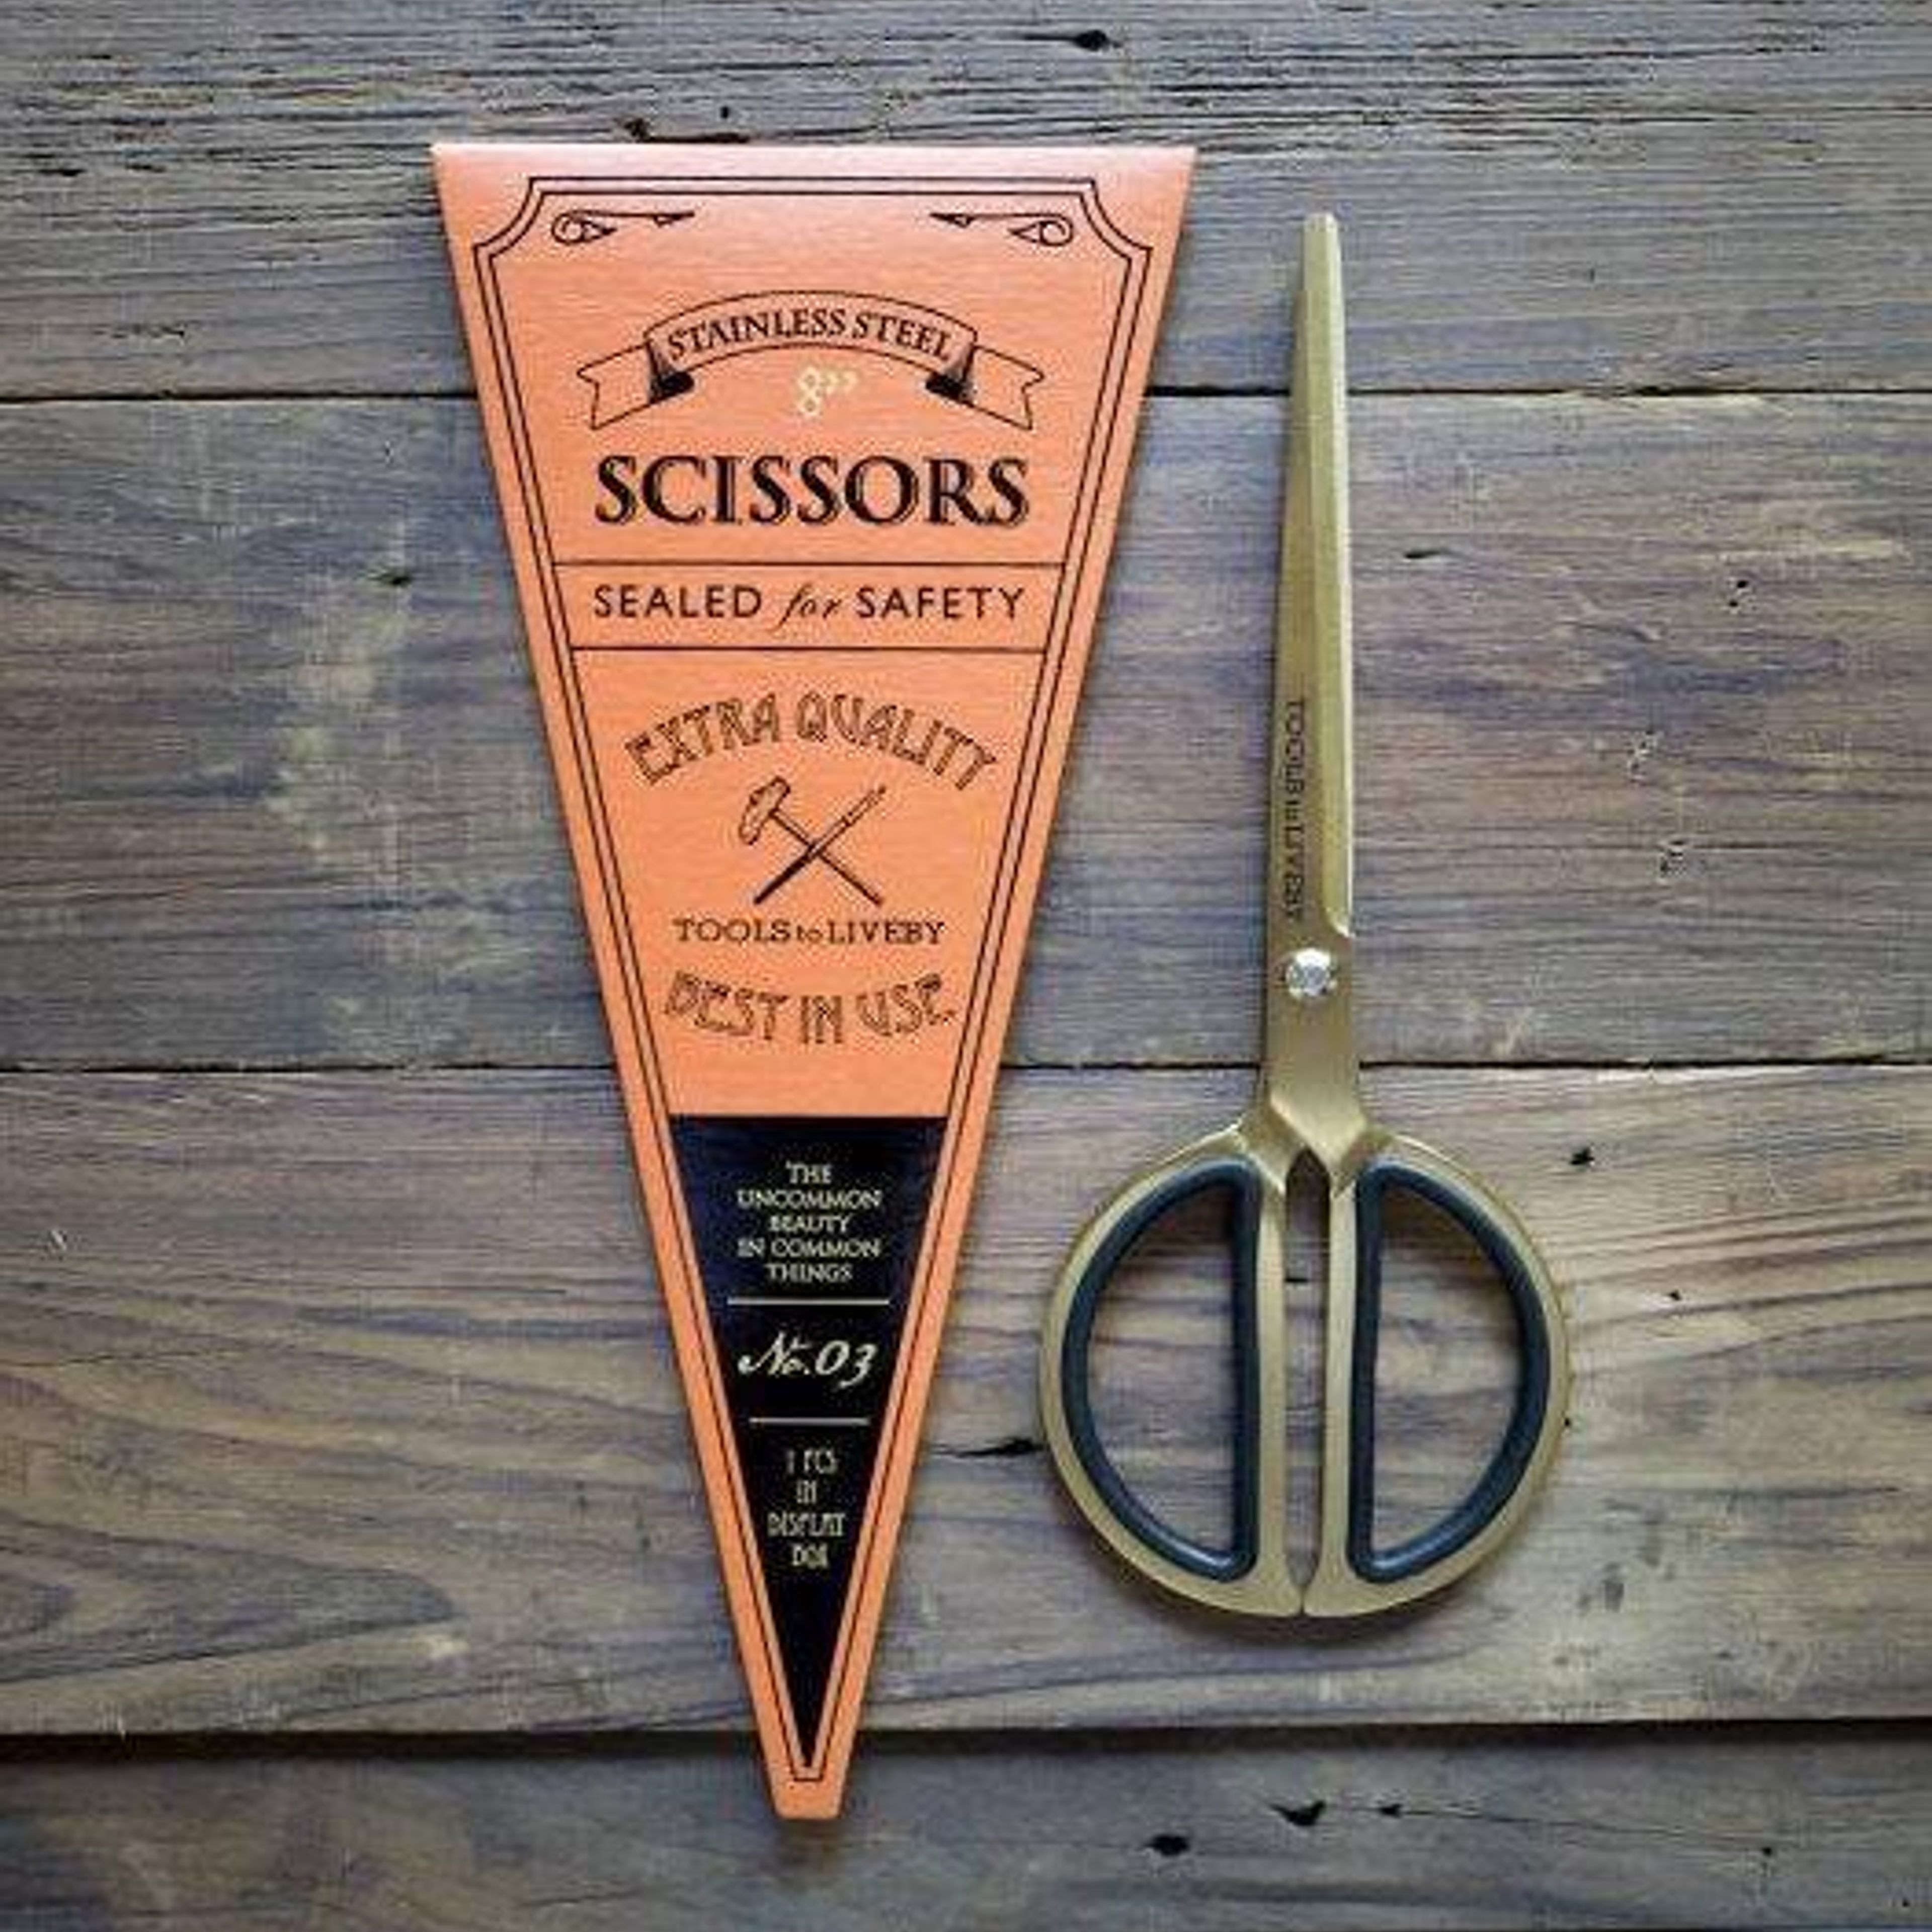 Tools to Liveby Scissors 8" (gold)